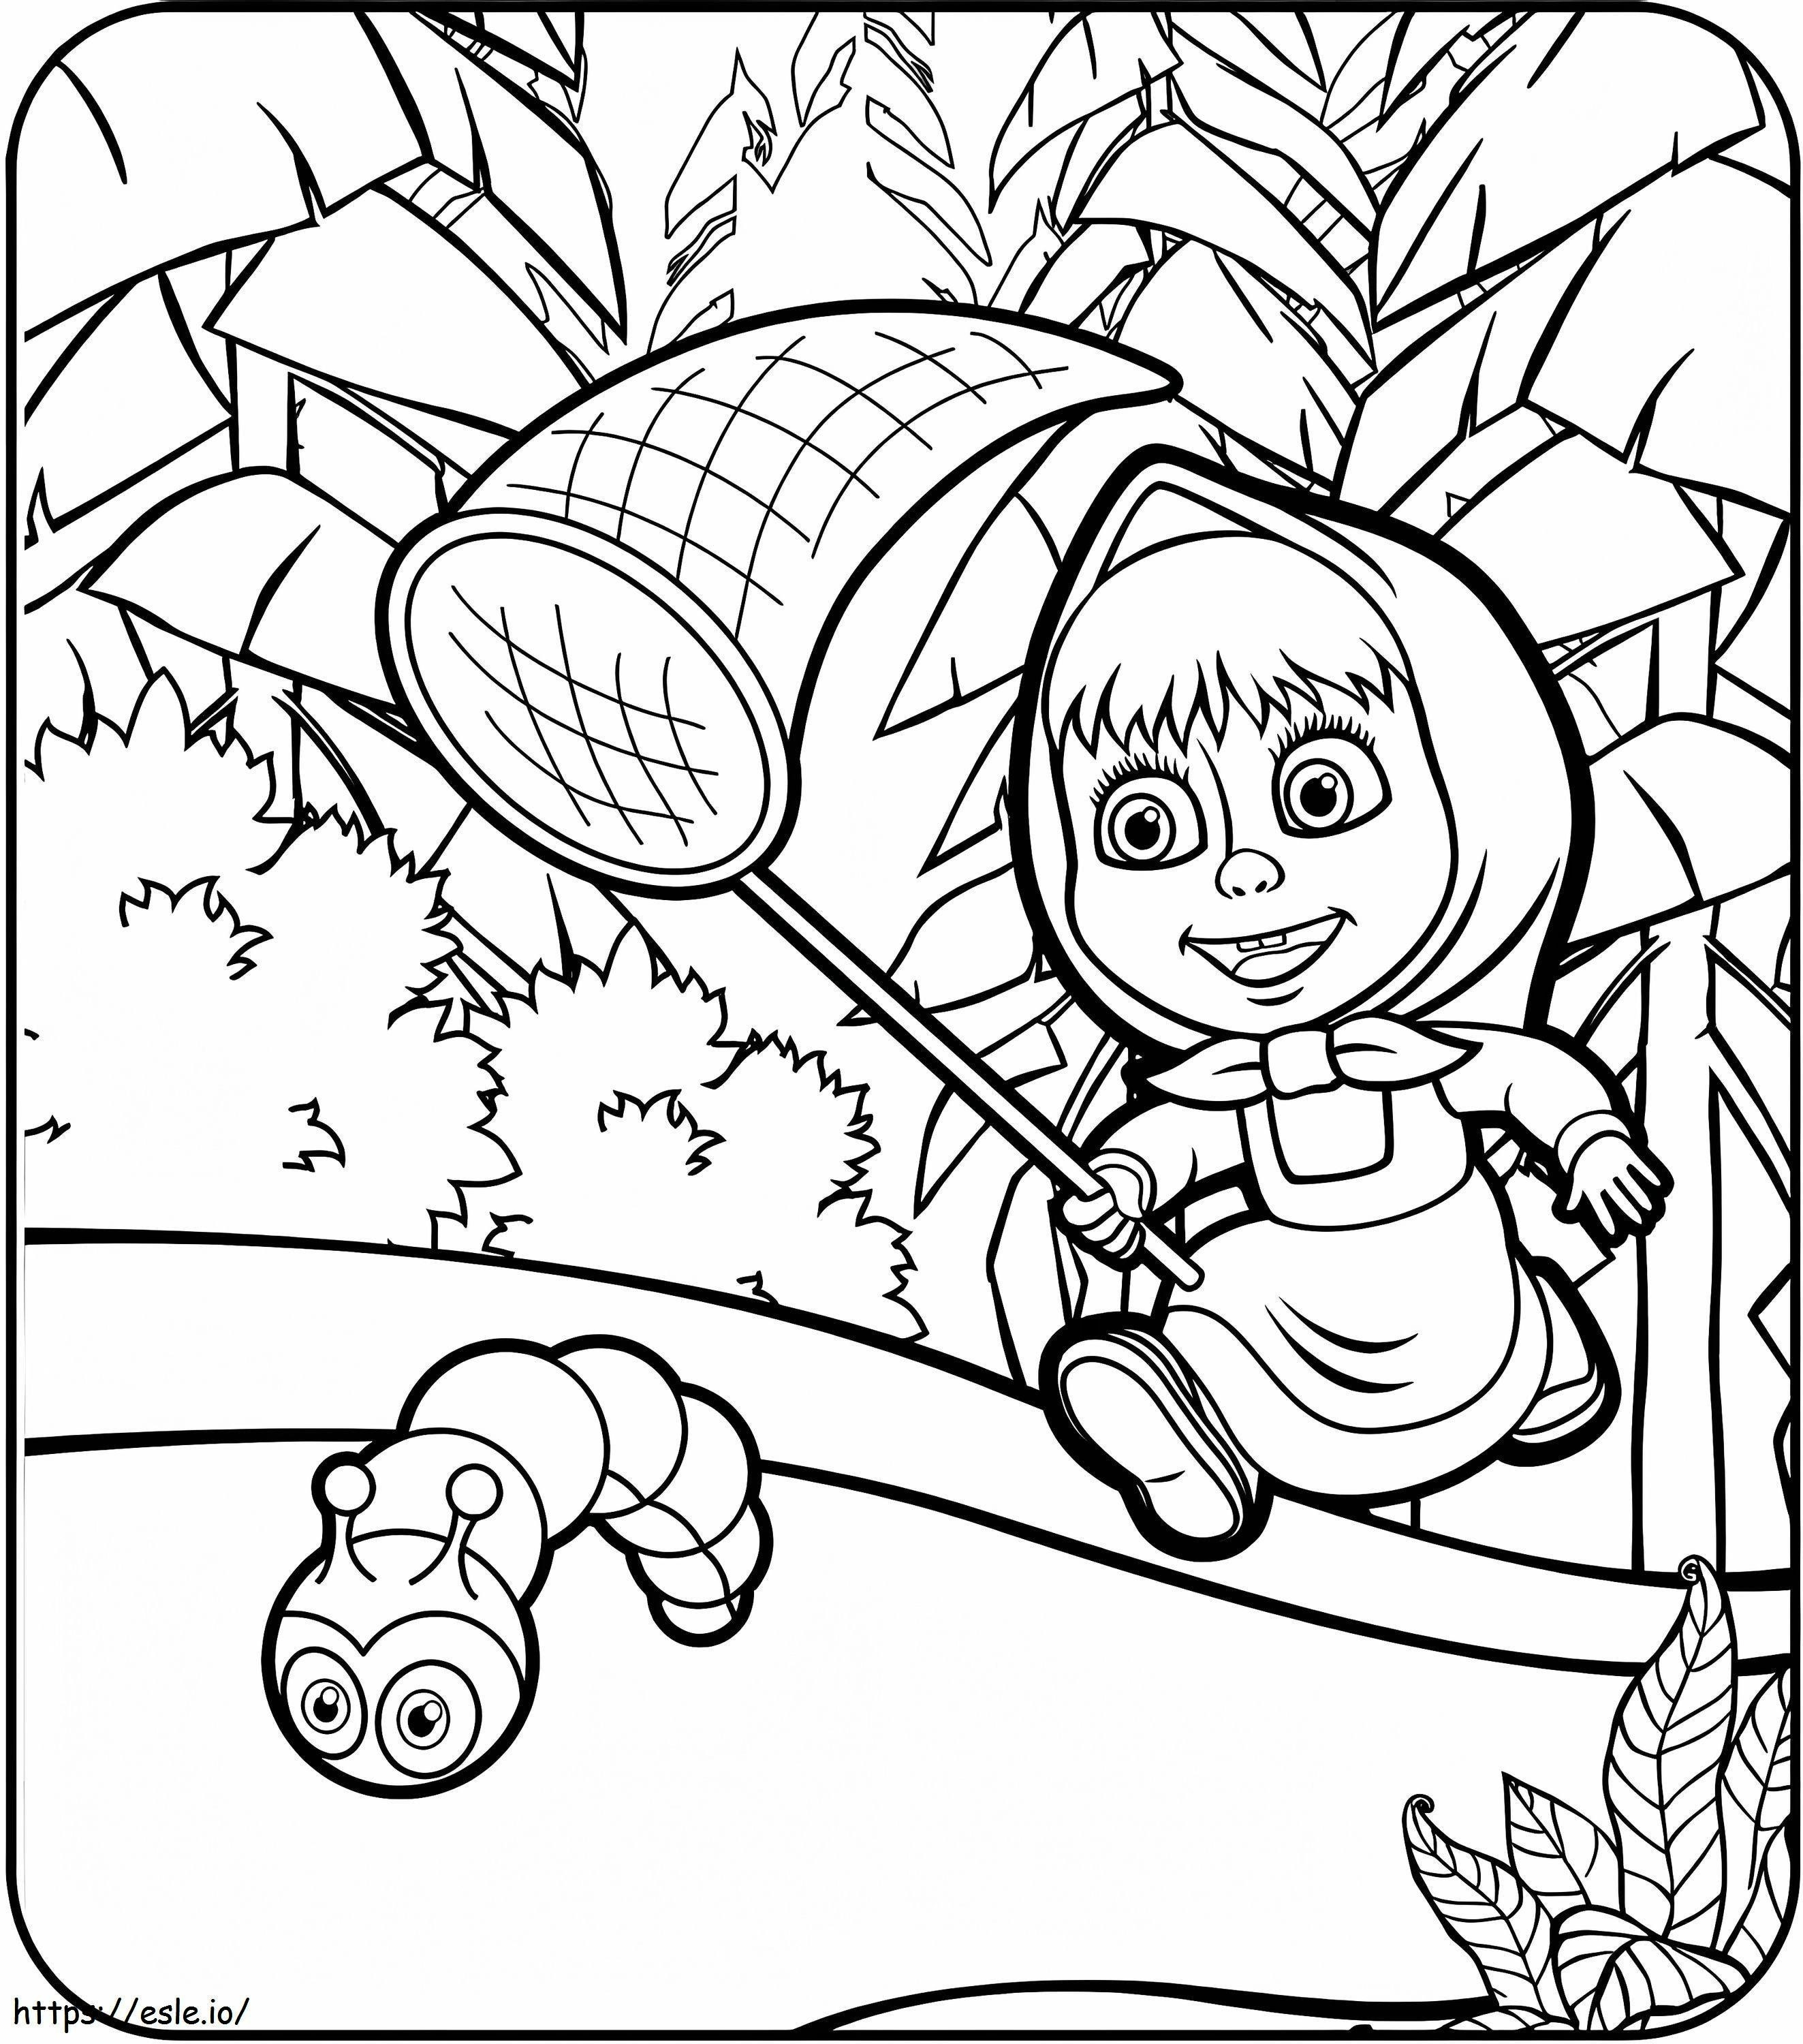 Masha Catching Worm coloring page